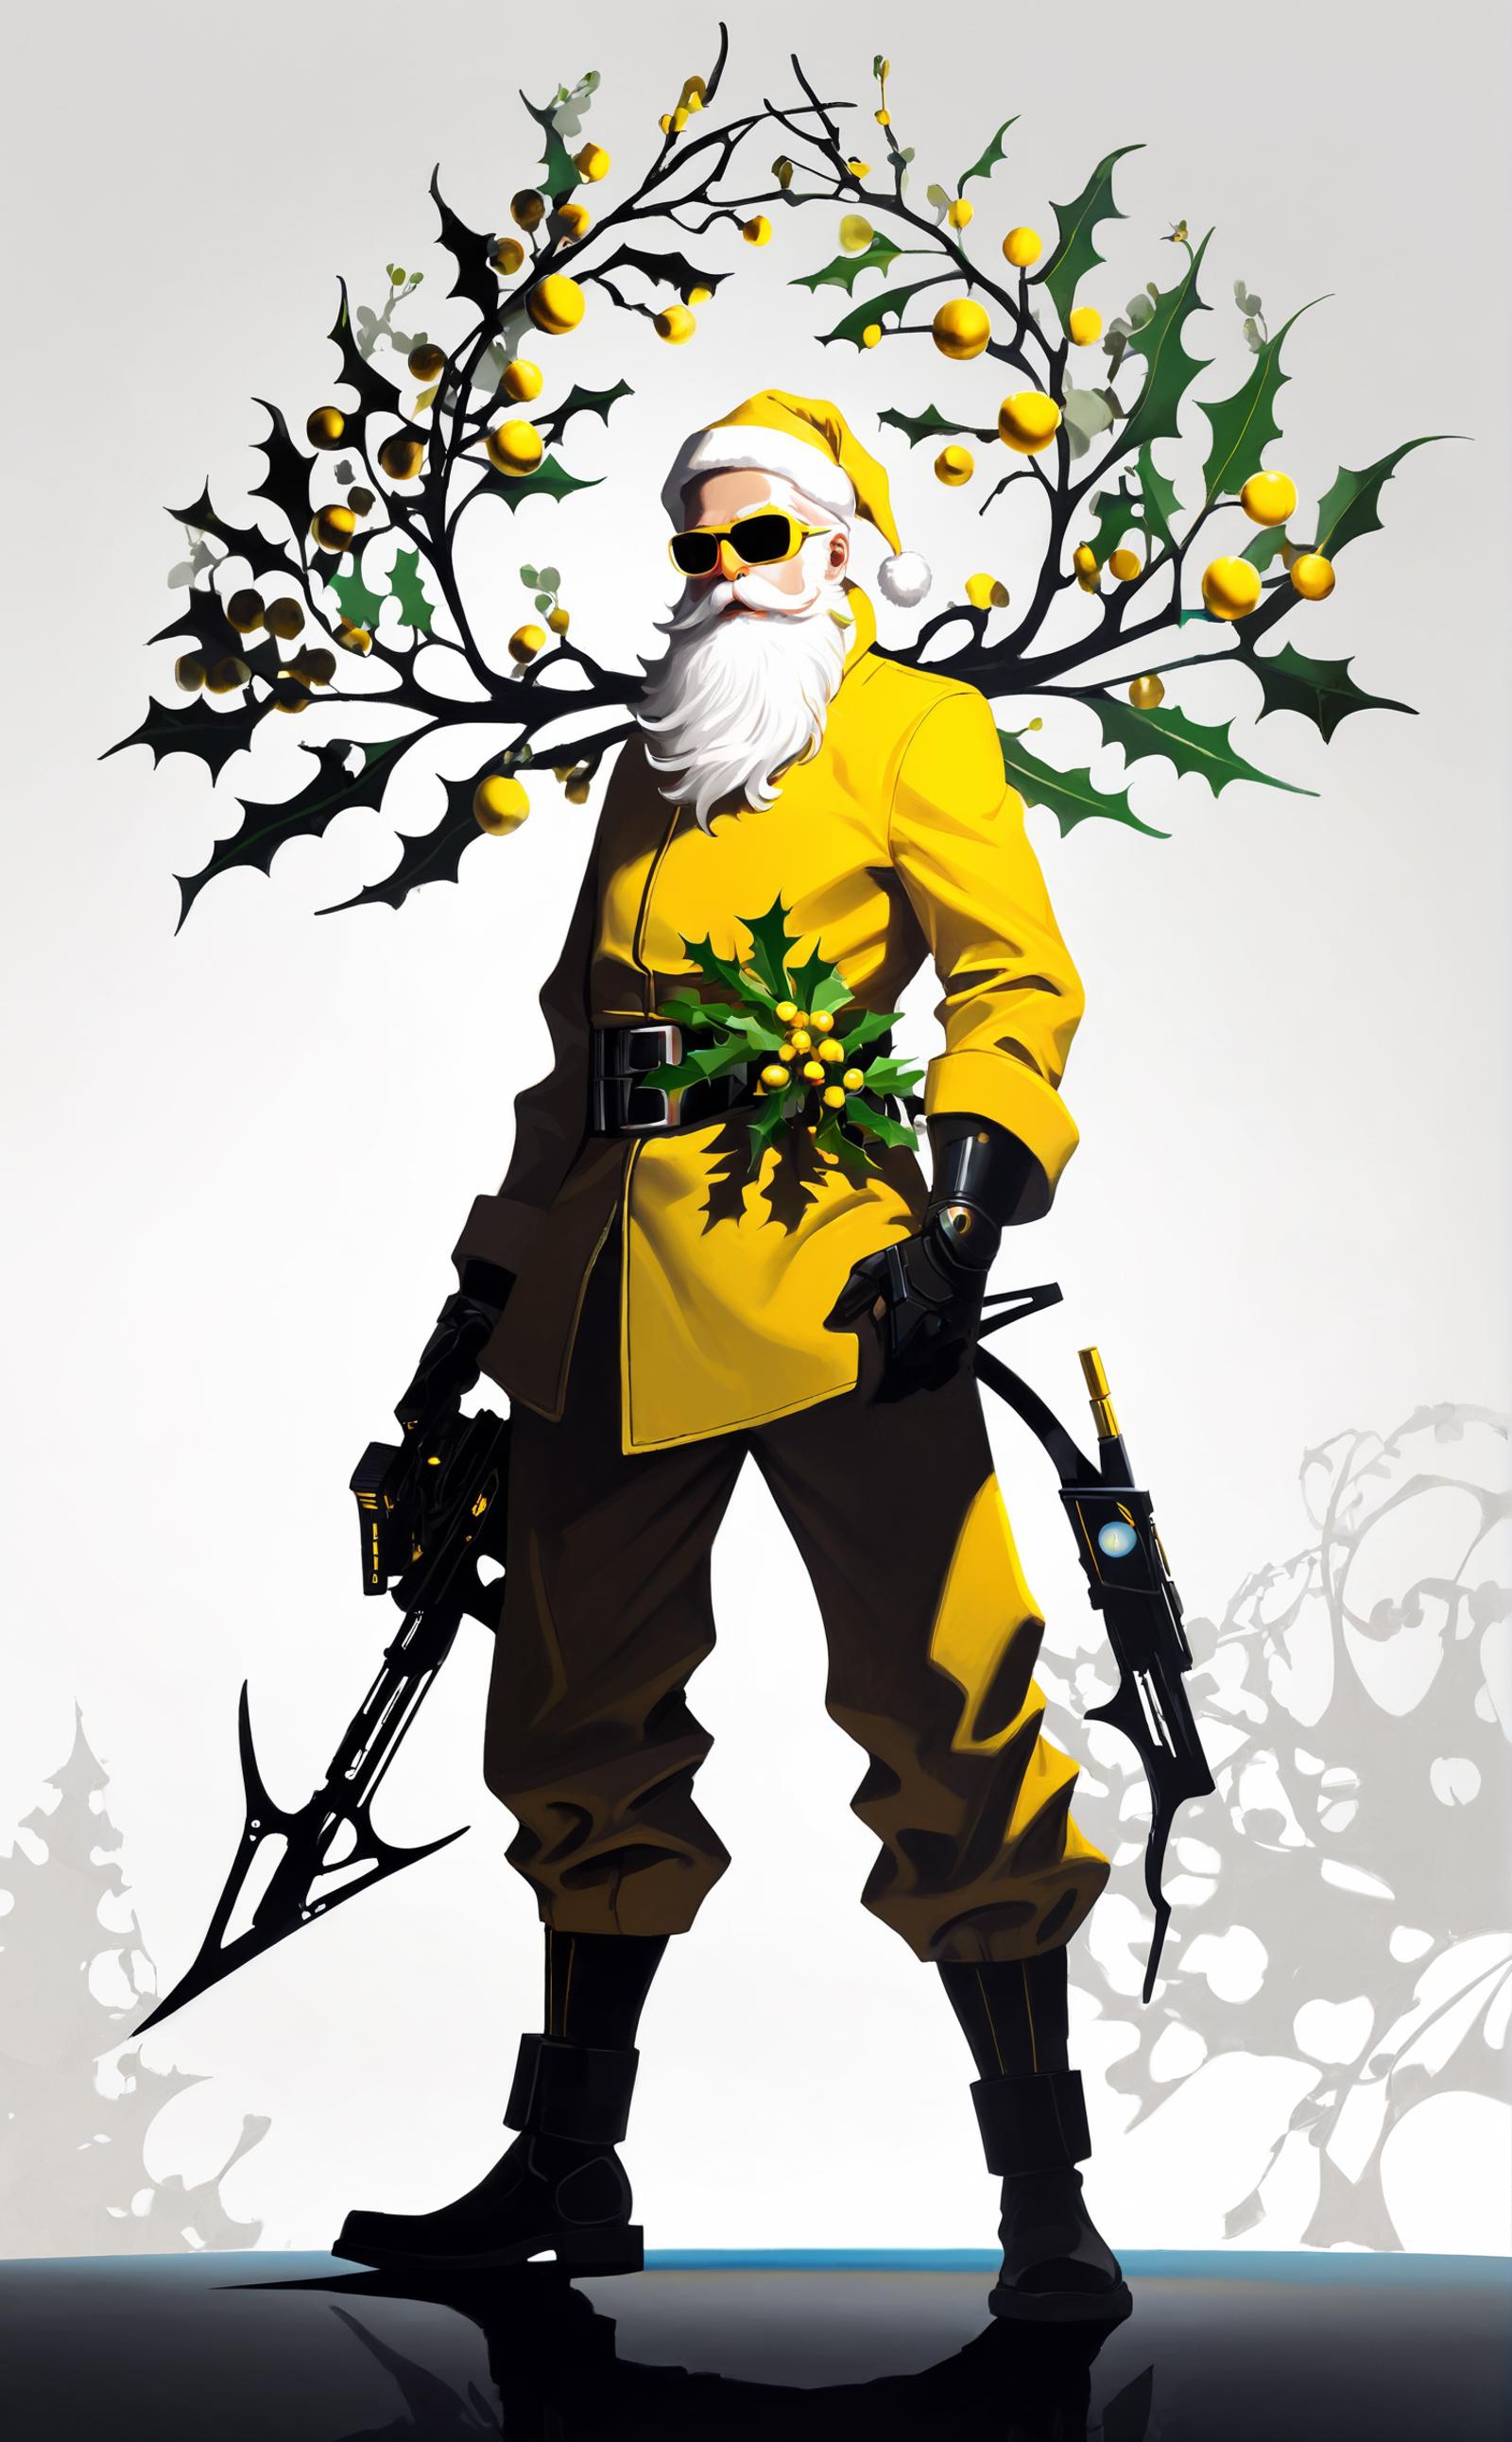 A cartoon drawing of a man wearing a yellow coat and sunglasses, holding a gun and a holly branch.